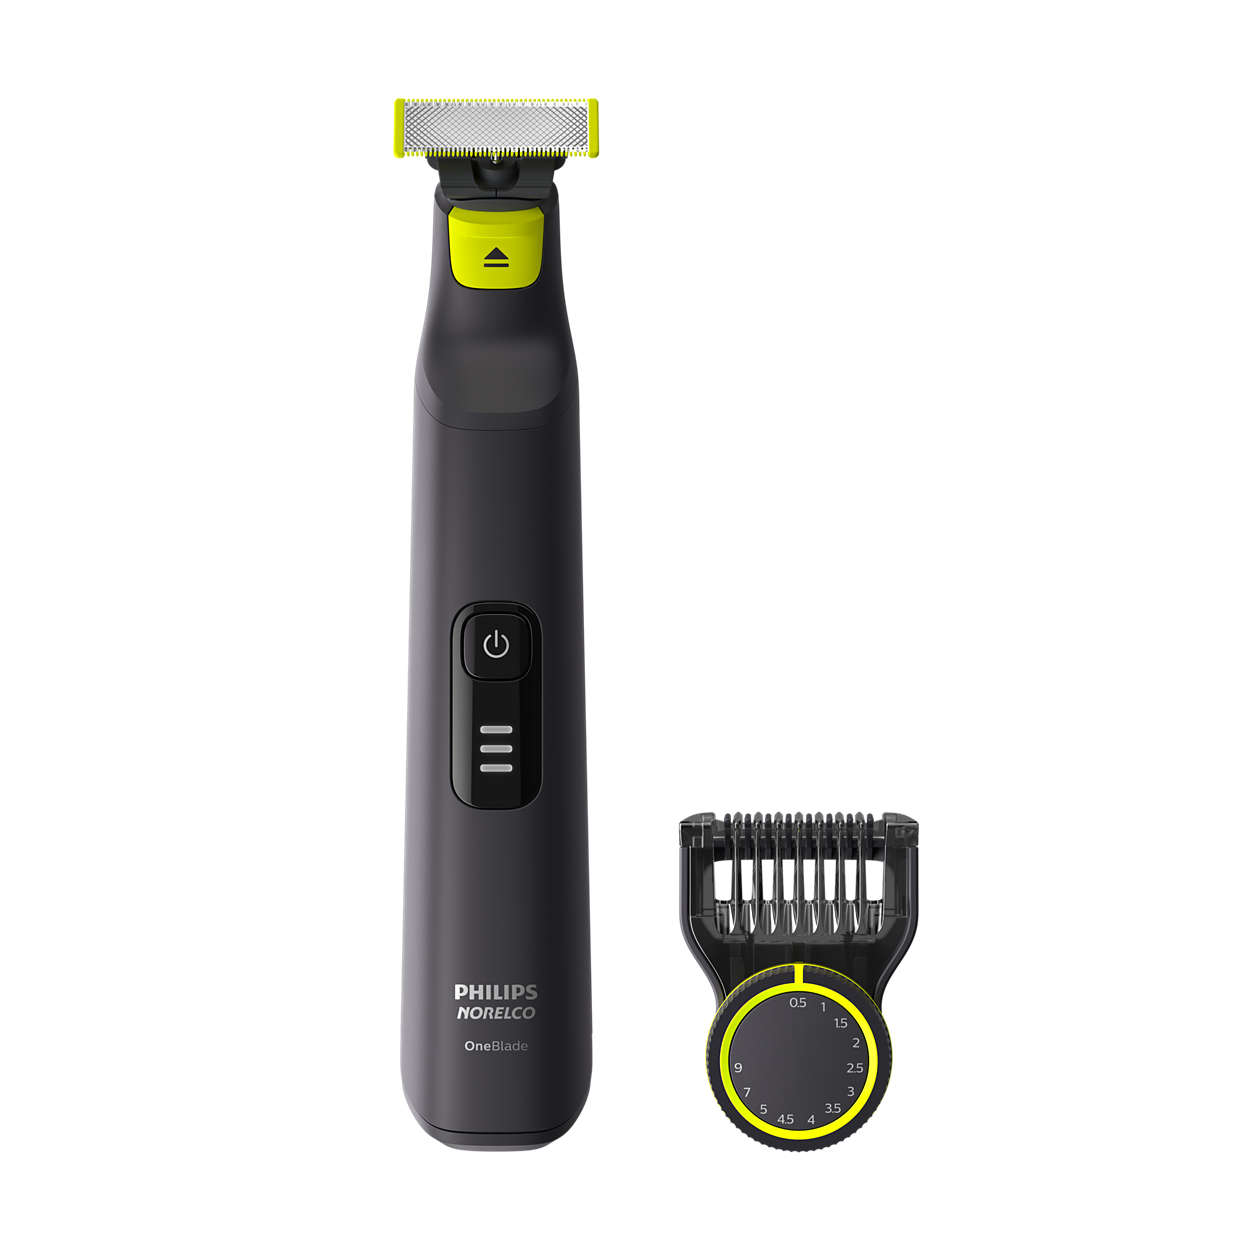 Philips Norelco Hair Trimmer & Shaver $39.99